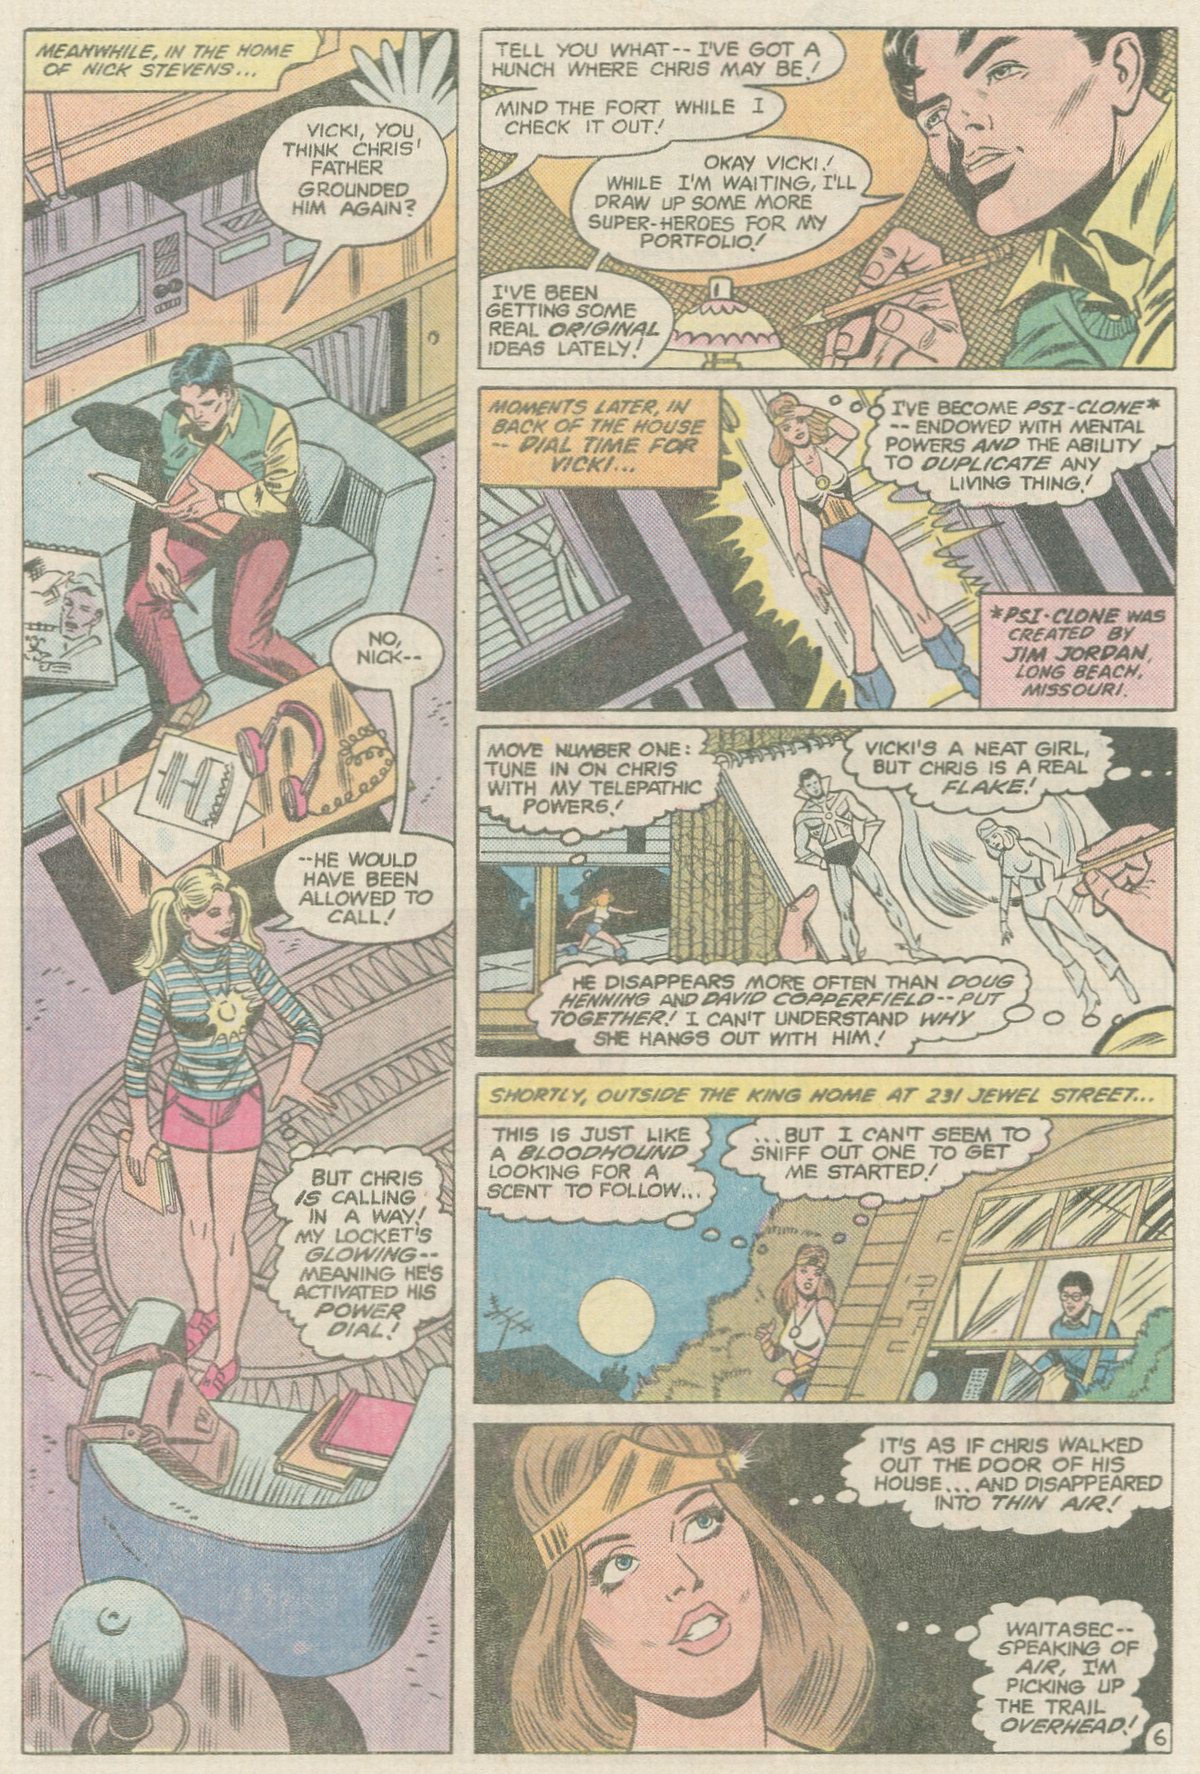 The New Adventures of Superboy 38 Page 24